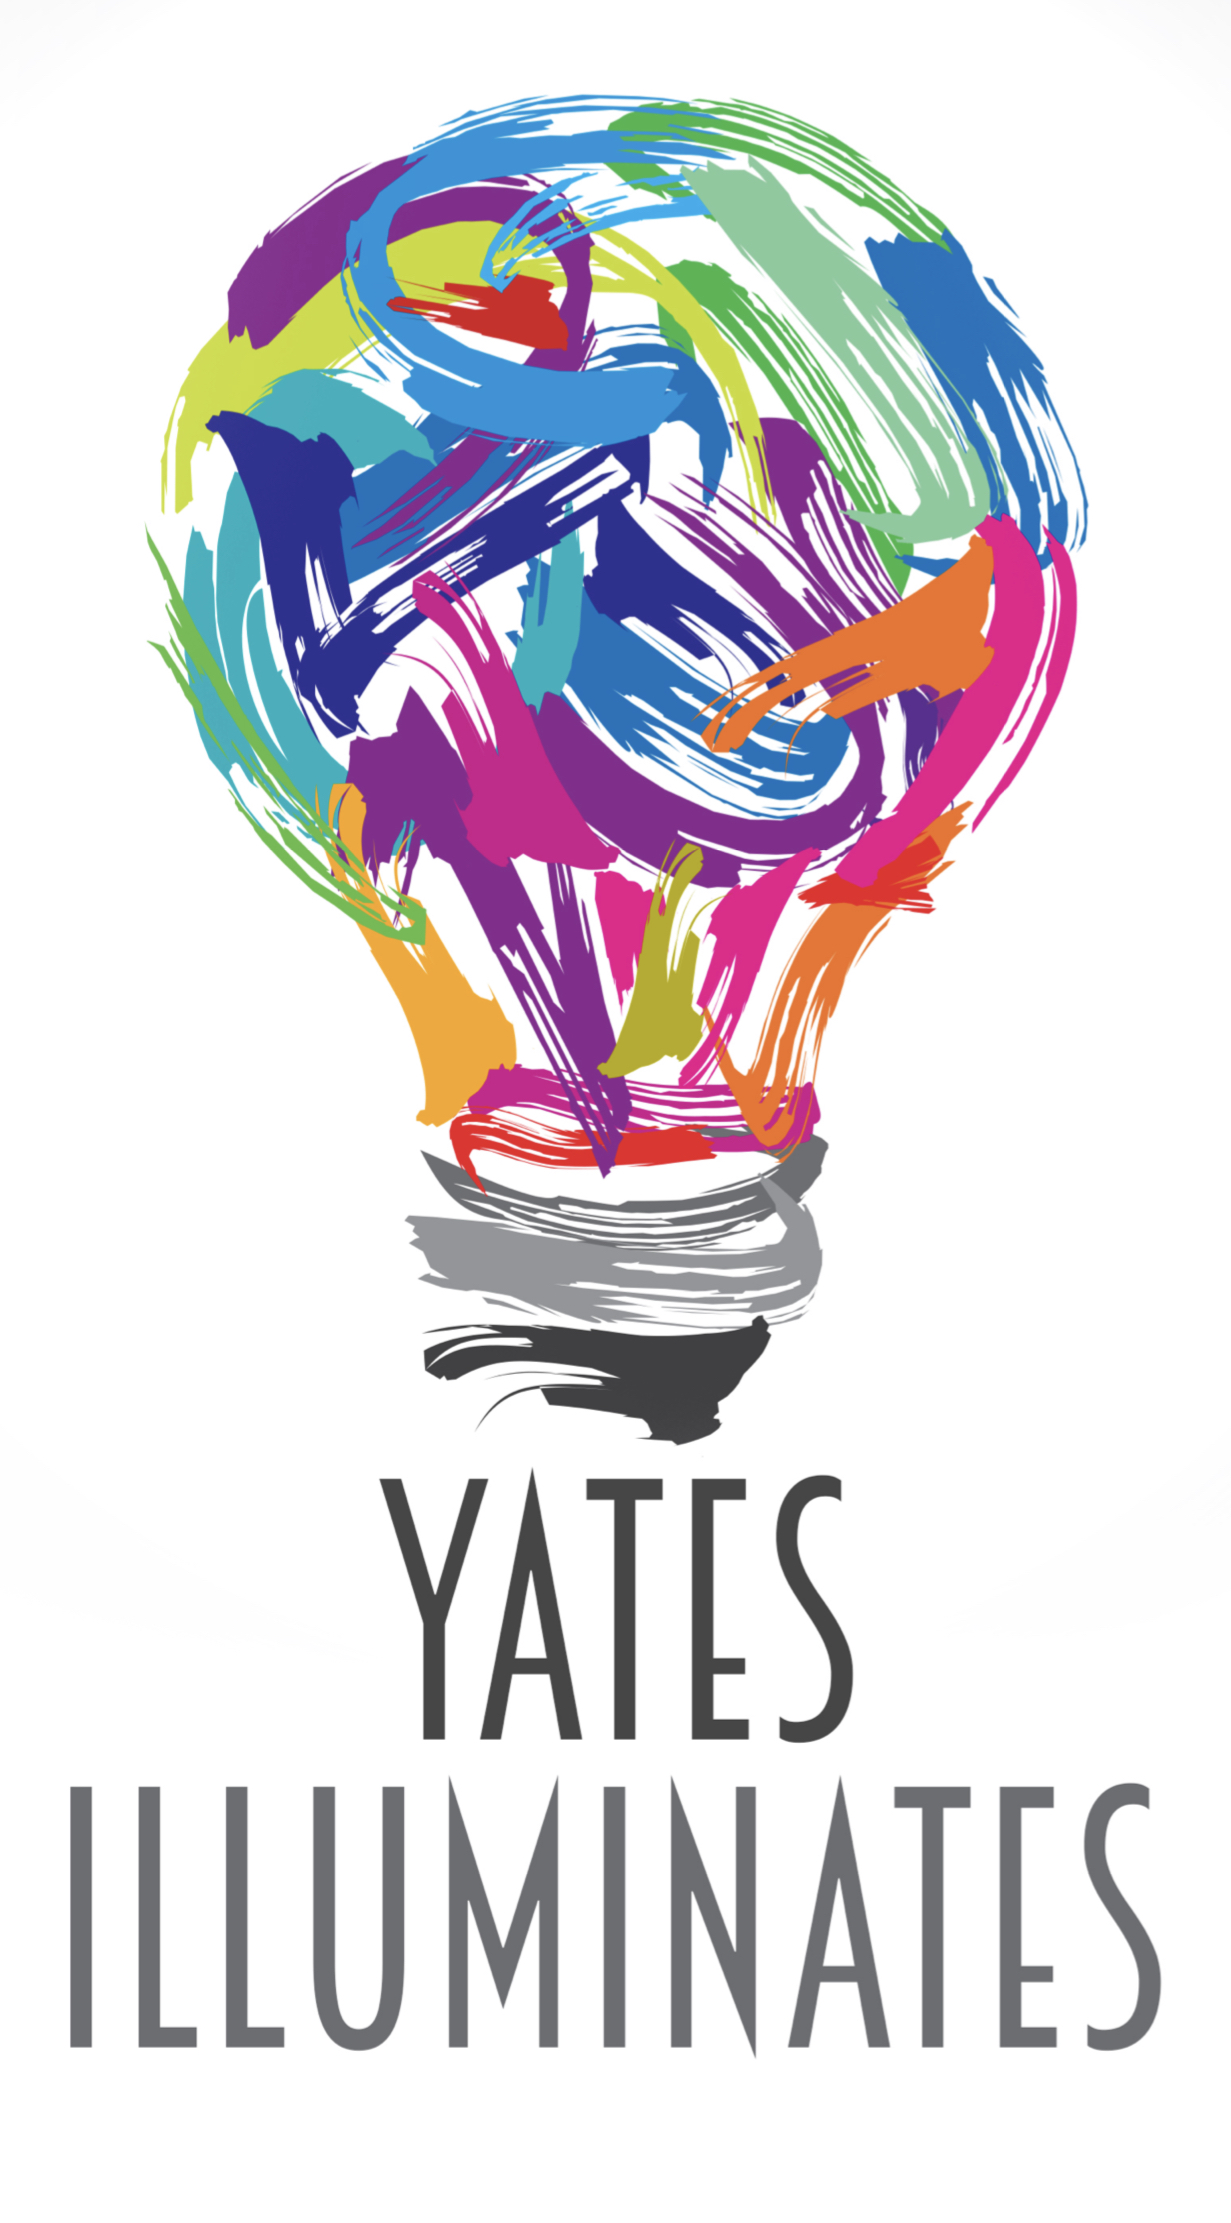 Lightbulb with various colors and text Yates Illuminates